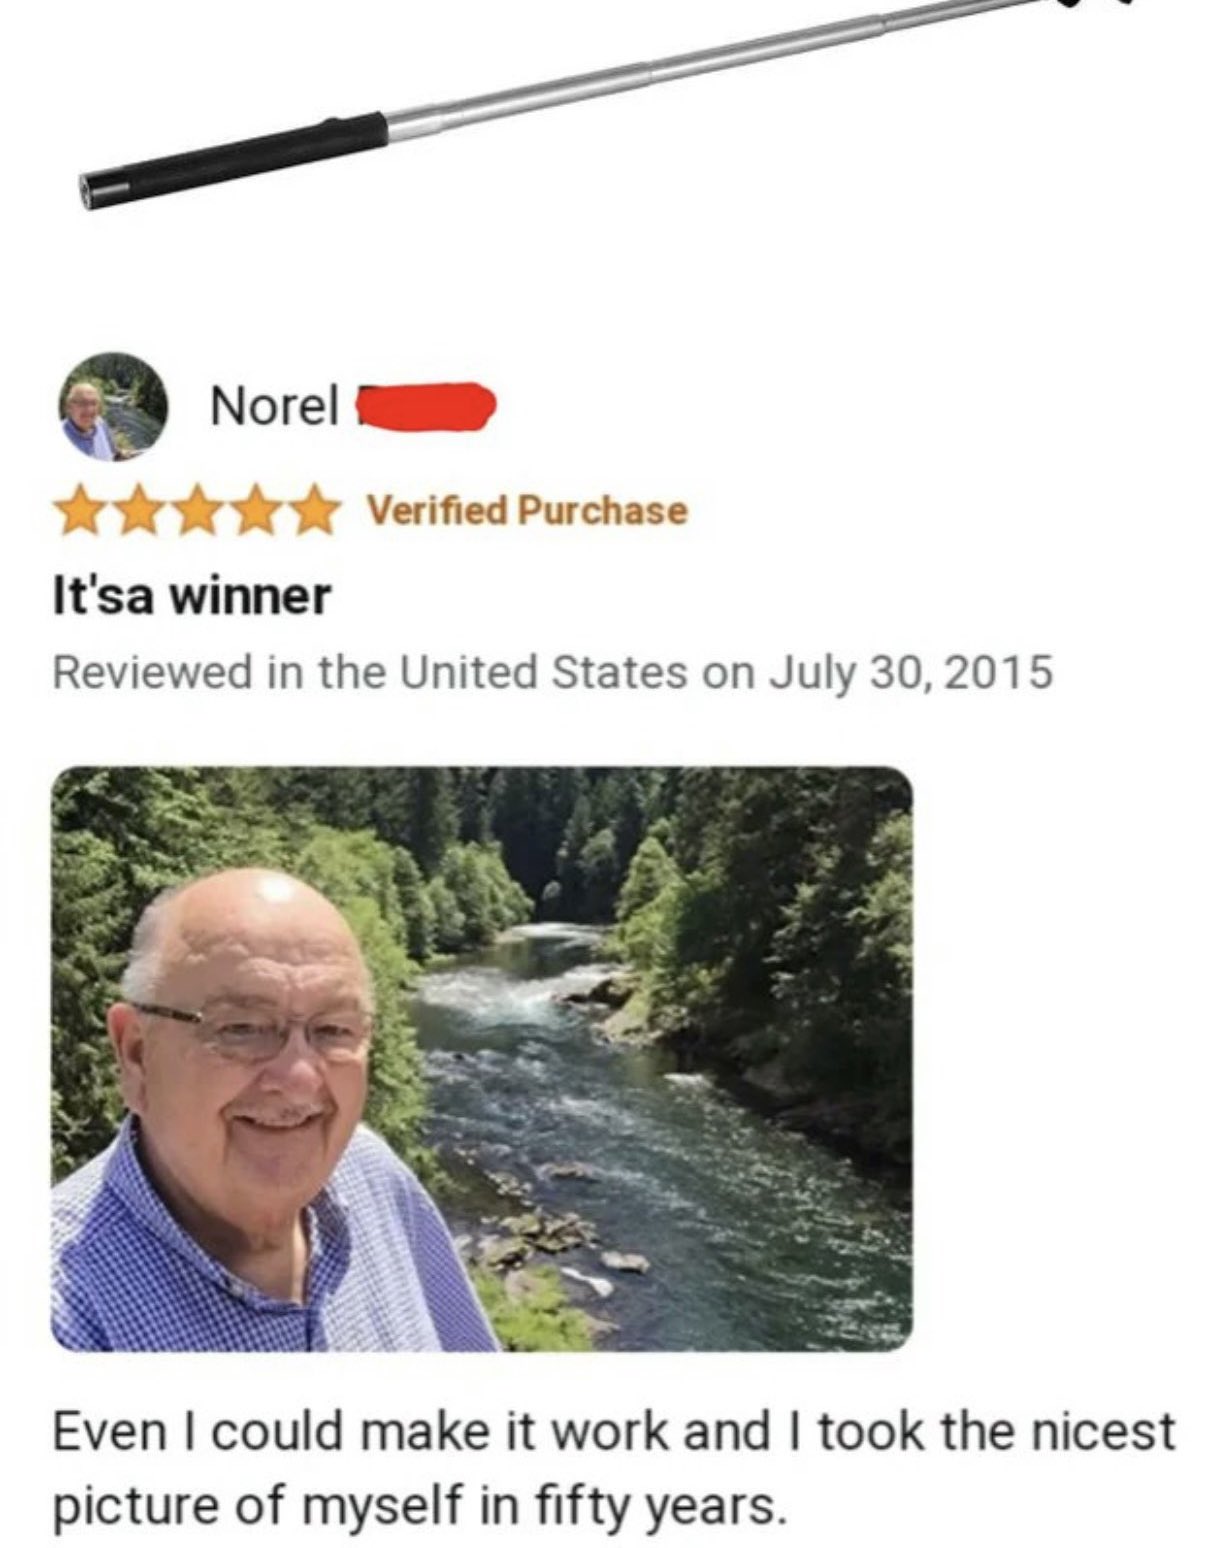 Dudes posting their wins - selfie stick review old man - Norel Verified Purchase It'sa winner Reviewed in the United States on Even I could make it work and I took the nicest picture of myself in fifty years.